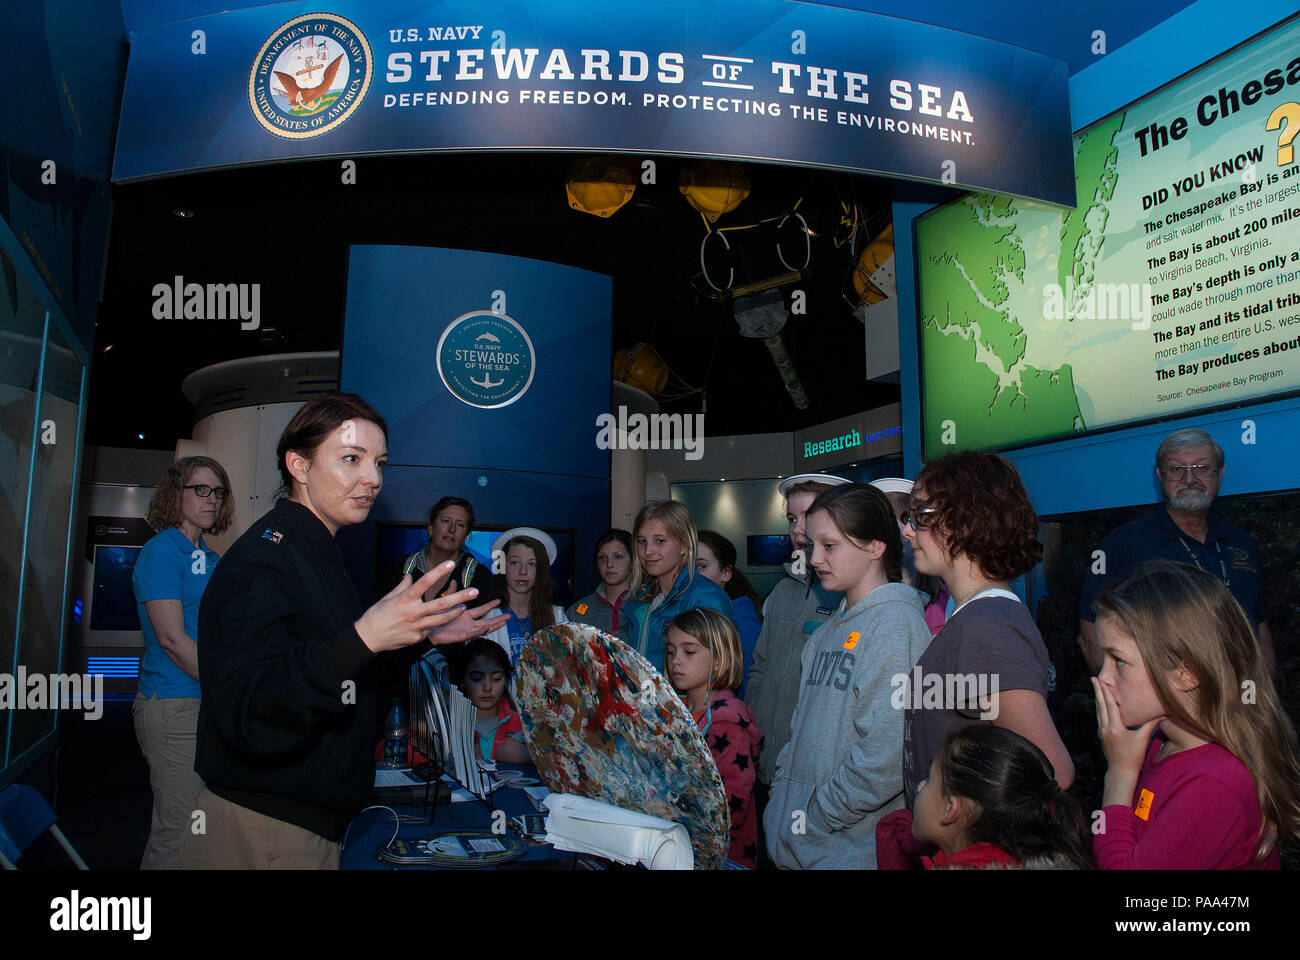 160319-N-MS174-013 NORFOLK, Va. (March 19, 2016) Lt. Lily Daniels, a public affairs officer assigned to U.S. Fleet Forces Command, discusses plastic waste processing with a group of children during the annual Women in Science, Technology, Engineering, and Mathematics (STEM) education event at Nauticus, the National Maritime Center. The Navy employs every means available to mitigate the potential environmental effects of our activities without jeopardizing the safety of our Sailors or impacting our Navy readiness mission. (U.S. Navy photo by Lt. Bobbie A. Camp/Released) Stock Photo